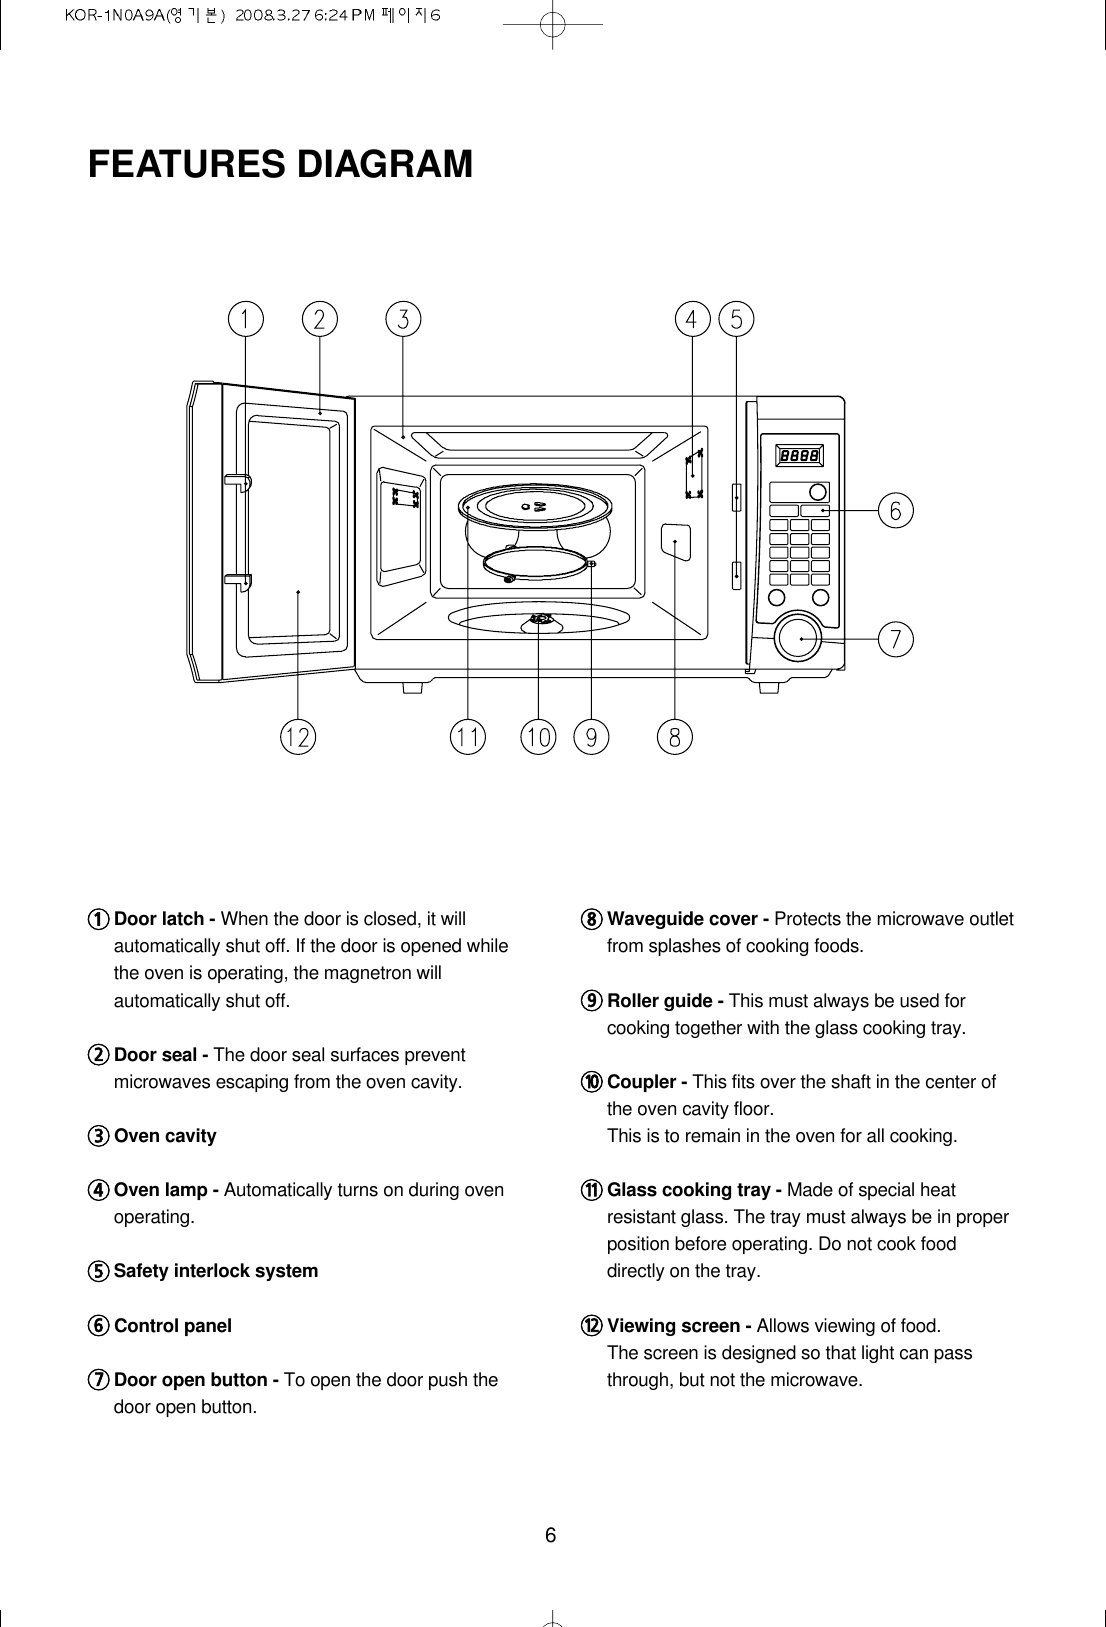 61Door latch - When the door is closed, it willautomatically shut off. If the door is opened whilethe oven is operating, the magnetron willautomatically shut off.2Door seal - The door seal surfaces preventmicrowaves escaping from the oven cavity.3Oven cavity4Oven lamp - Automatically turns on during ovenoperating.5Safety interlock system 6Control panel7Door open button - To open the door push thedoor open button.8Waveguide cover - Protects the microwave outletfrom splashes of cooking foods.9Roller guide - This must always be used forcooking together with the glass cooking tray.0Coupler - This fits over the shaft in the center ofthe oven cavity floor.This is to remain in the oven for all cooking.qGlass cooking tray - Made of special heatresistant glass. The tray must always be in properposition before operating. Do not cook fooddirectly on the tray.wViewing screen - Allows viewing of food.The screen is designed so that light can passthrough, but not the microwave.FEATURES DIAGRAM